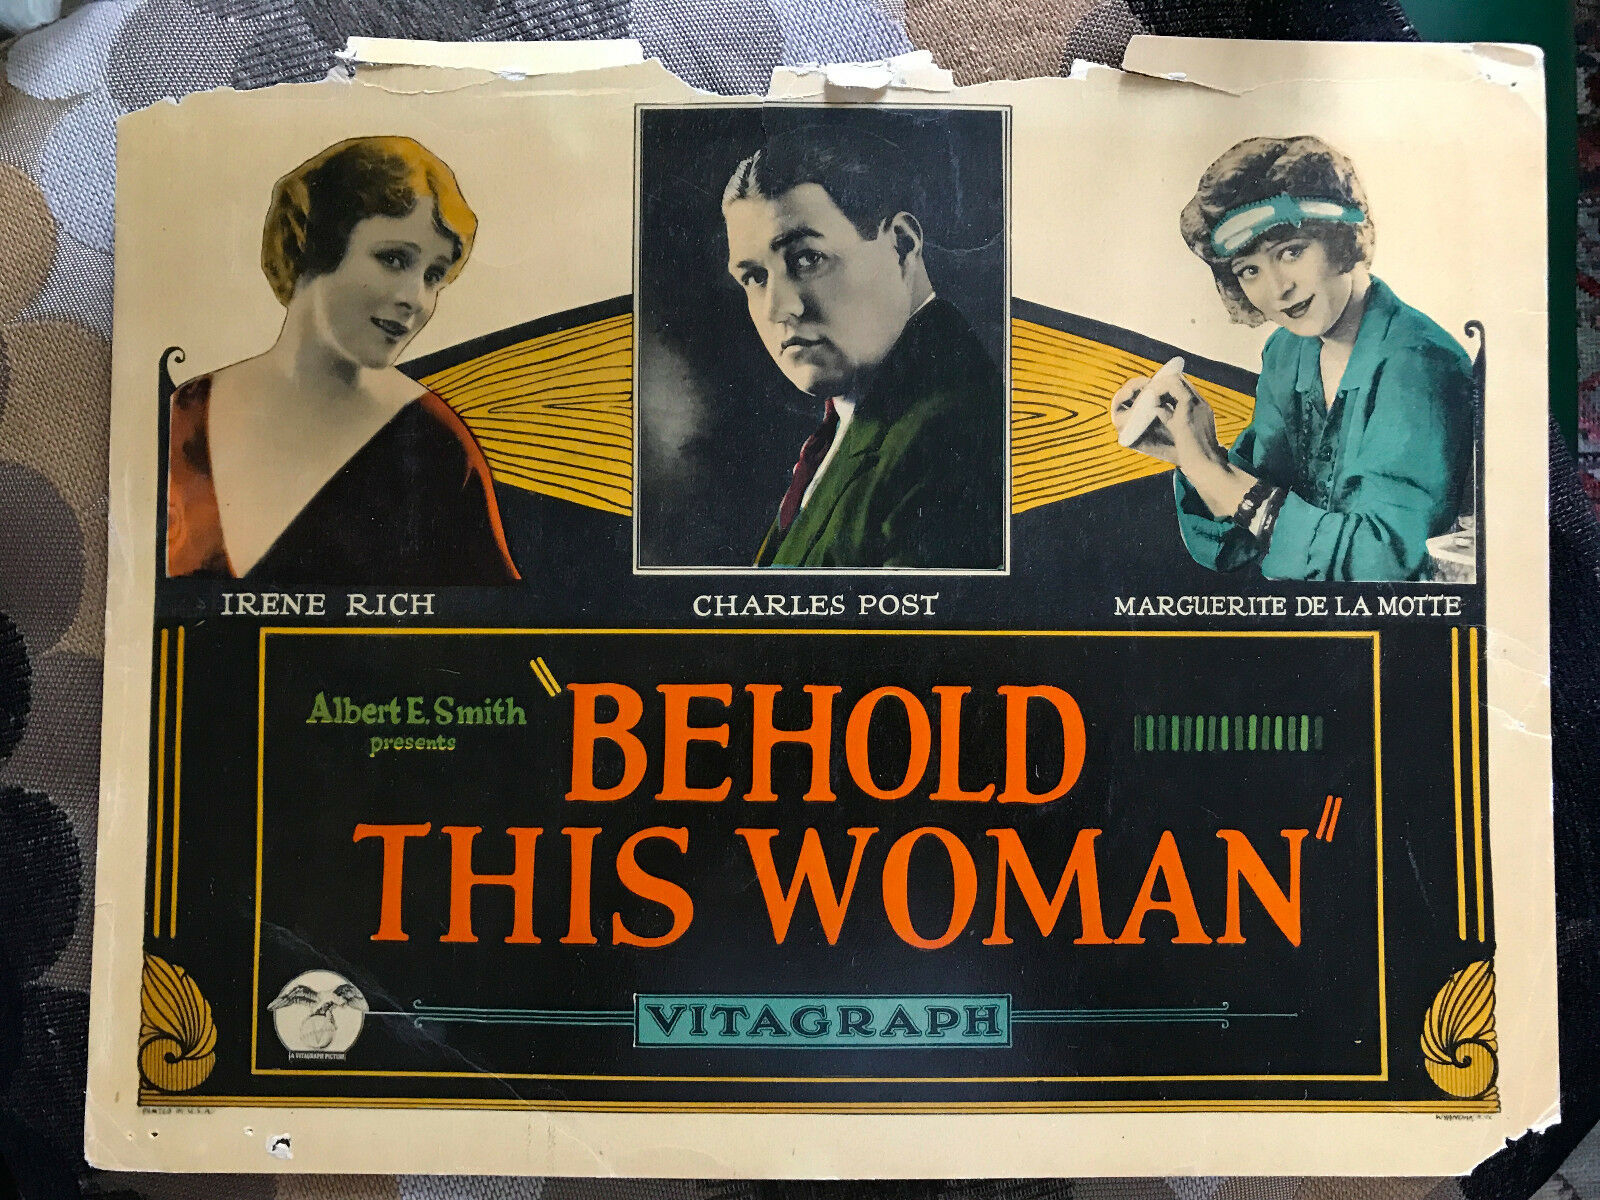 Behold This Woman 1924 Vitagraph Silent 11x14" Lobby Card Irene Rich